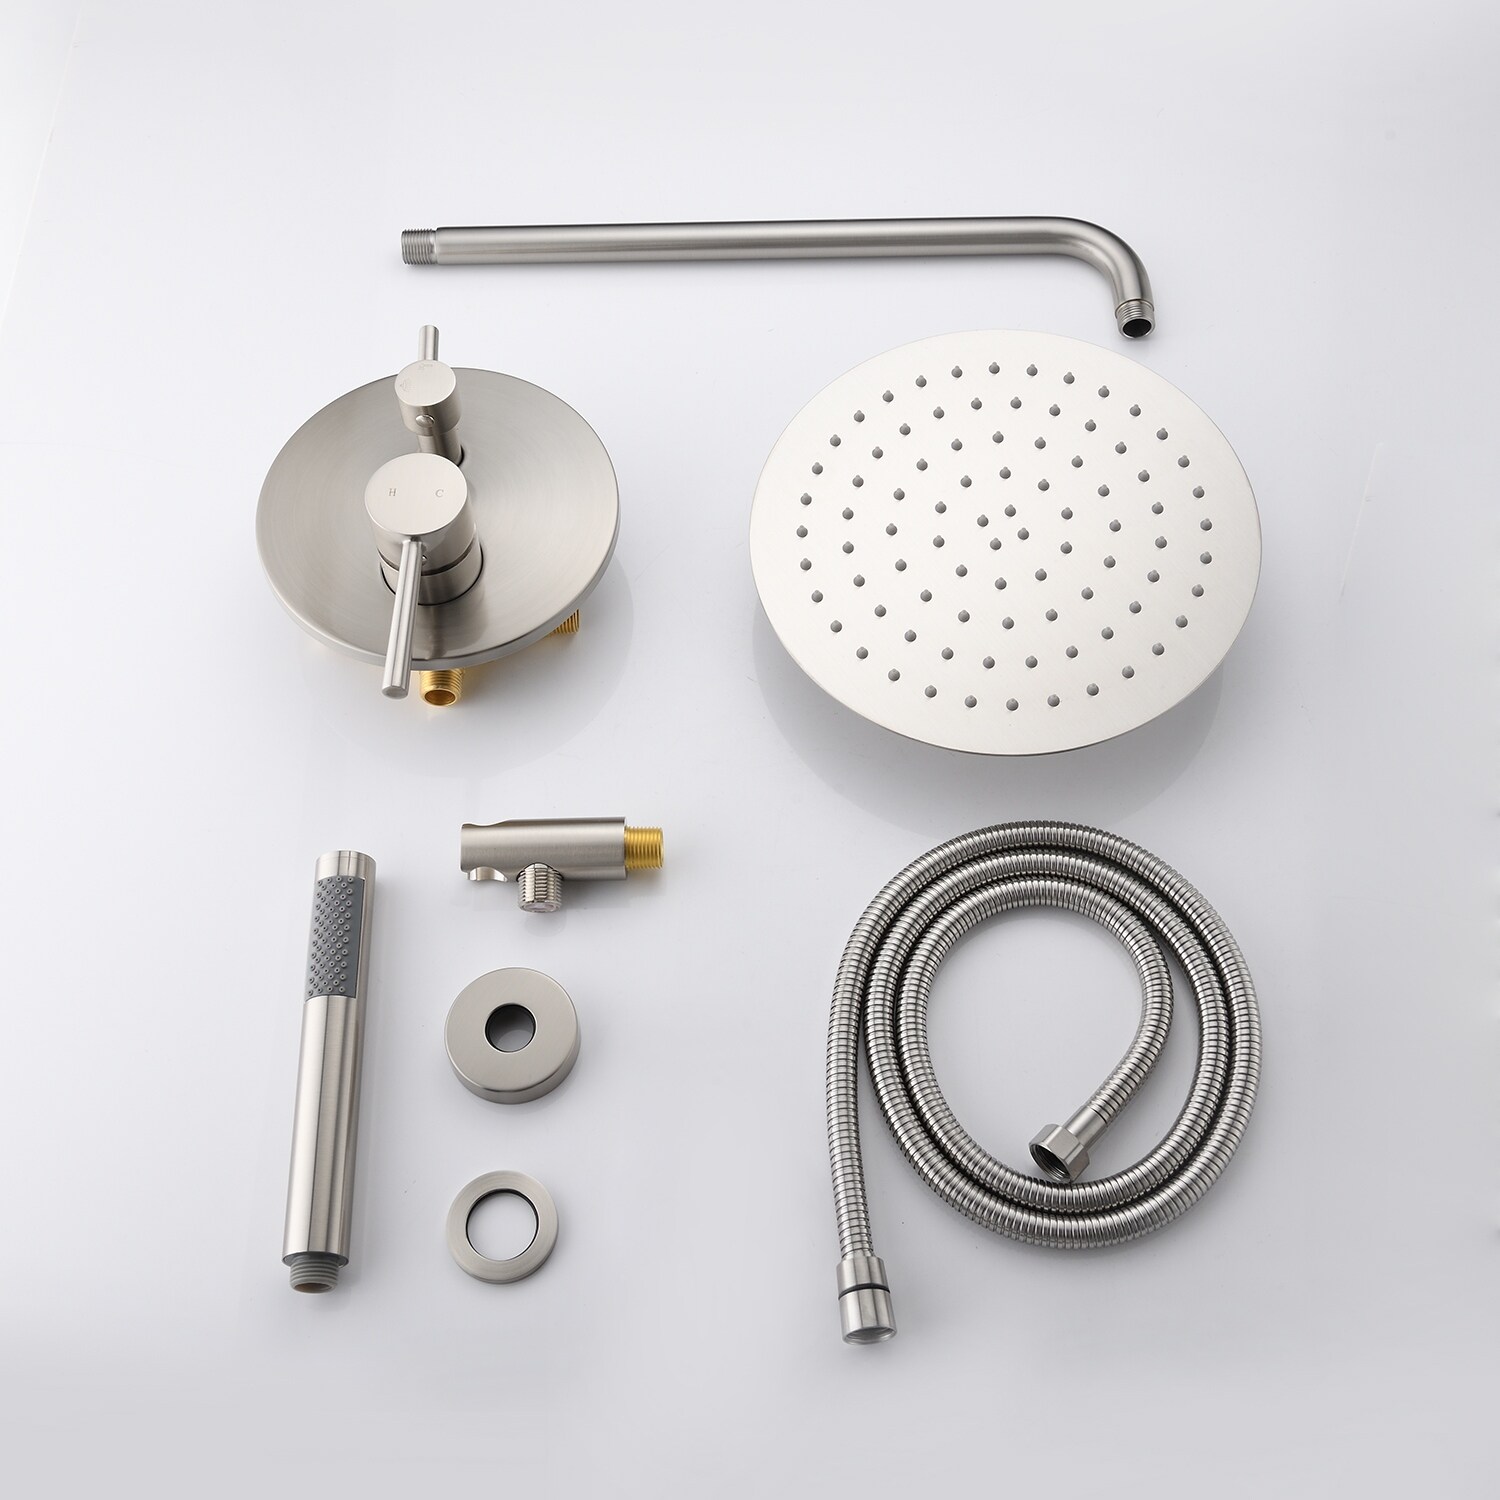 PROOX PRAE103ORB 5-Spray 8 in. Round Shower System Kit with Hand Shower and Adjustable Slide Bar Soap Dish in Oil Rubbed Bronze